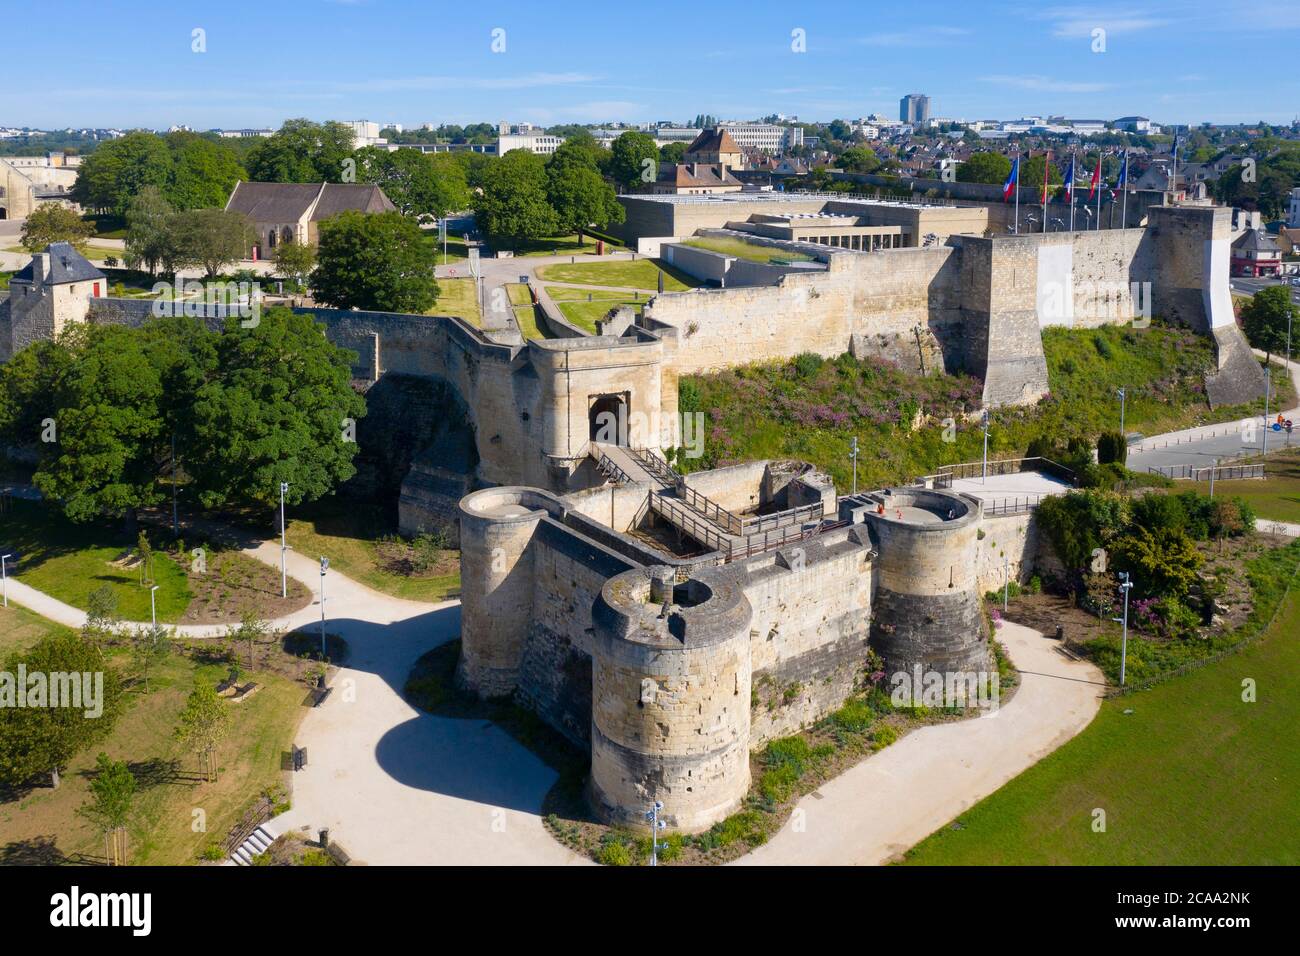 Caen Castle - 1060, William of Normandy established a new stronghold in Caen. Chateau de Caen castle in the Norman town of Caen in the Calvados depart Stock Photo